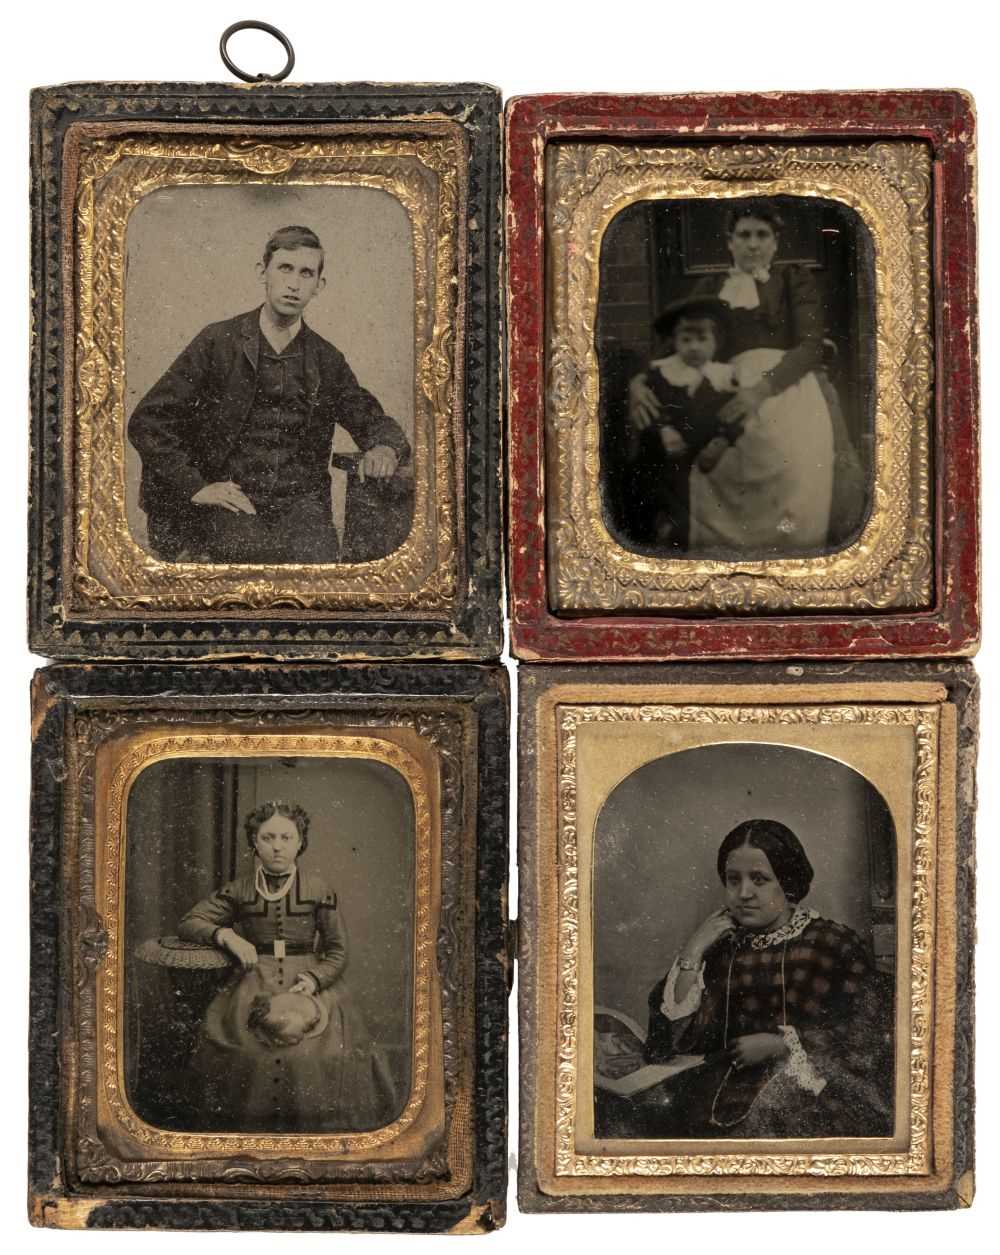 Lot 250 - Cased Images. A small quantity of cased images and other mostly Victorian portrait photography